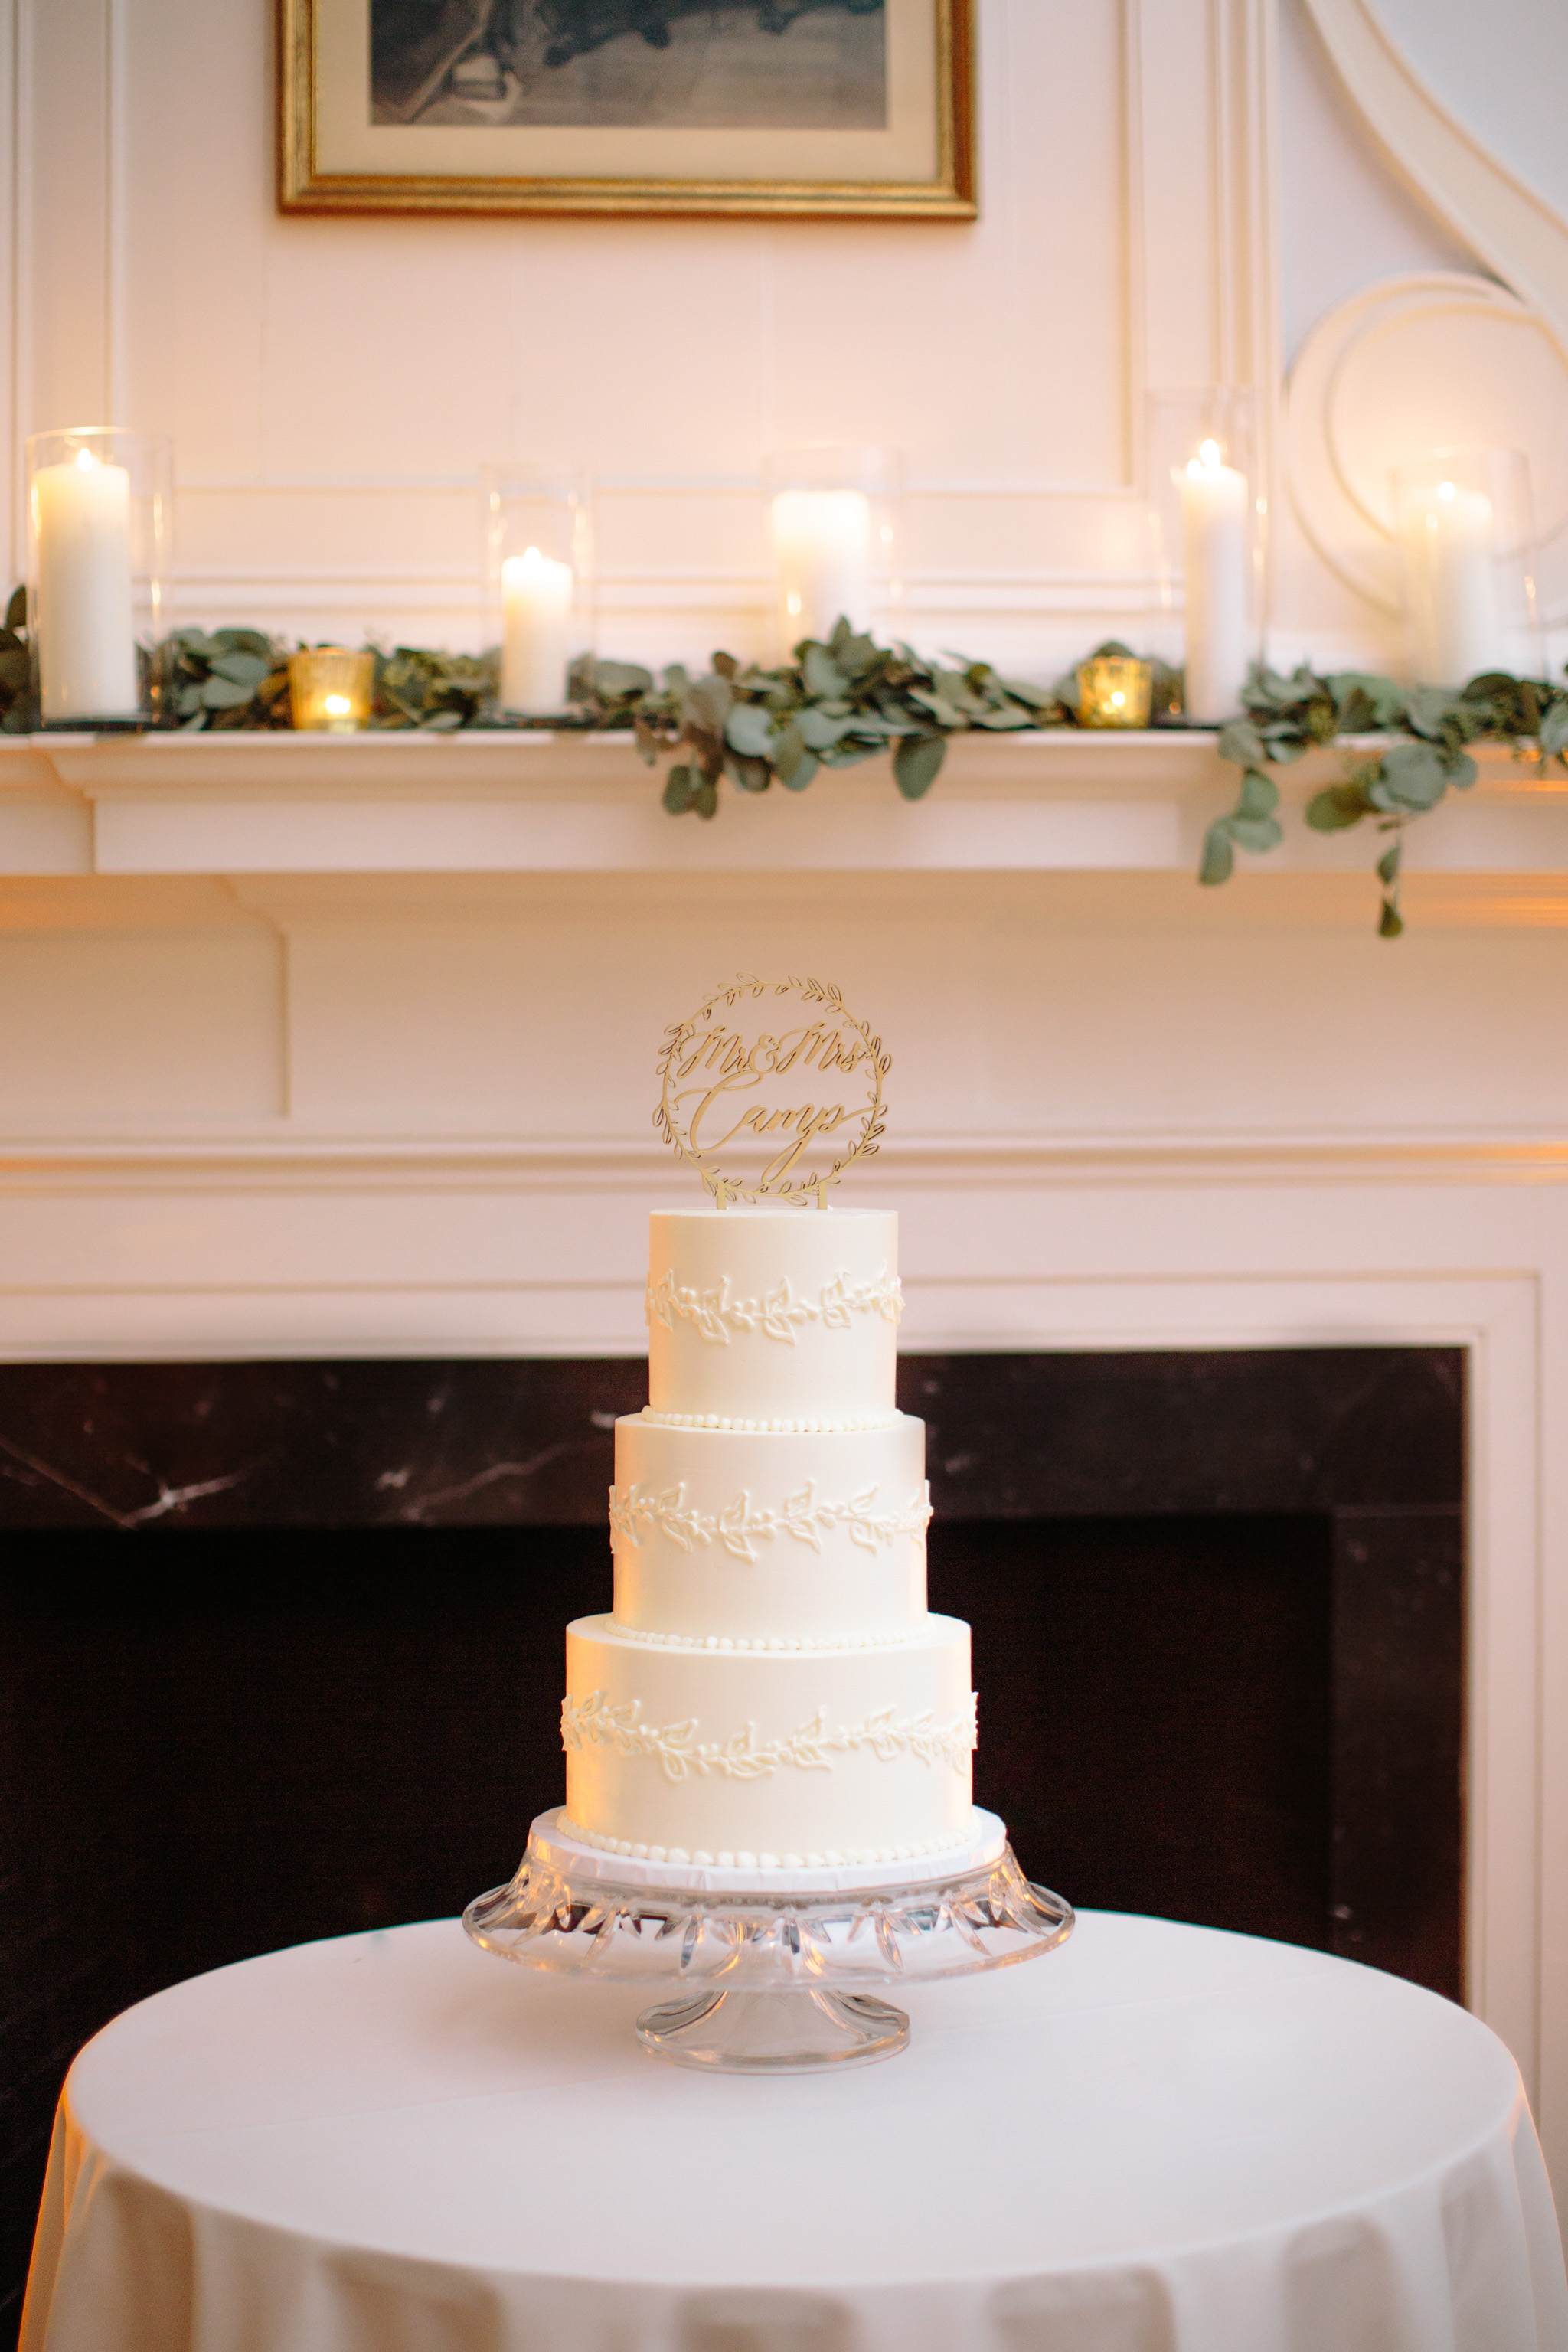 This classic all-white wedding cake tasted as good as it looked! Photo by luxury wedding photographer Rebecca Cerasani